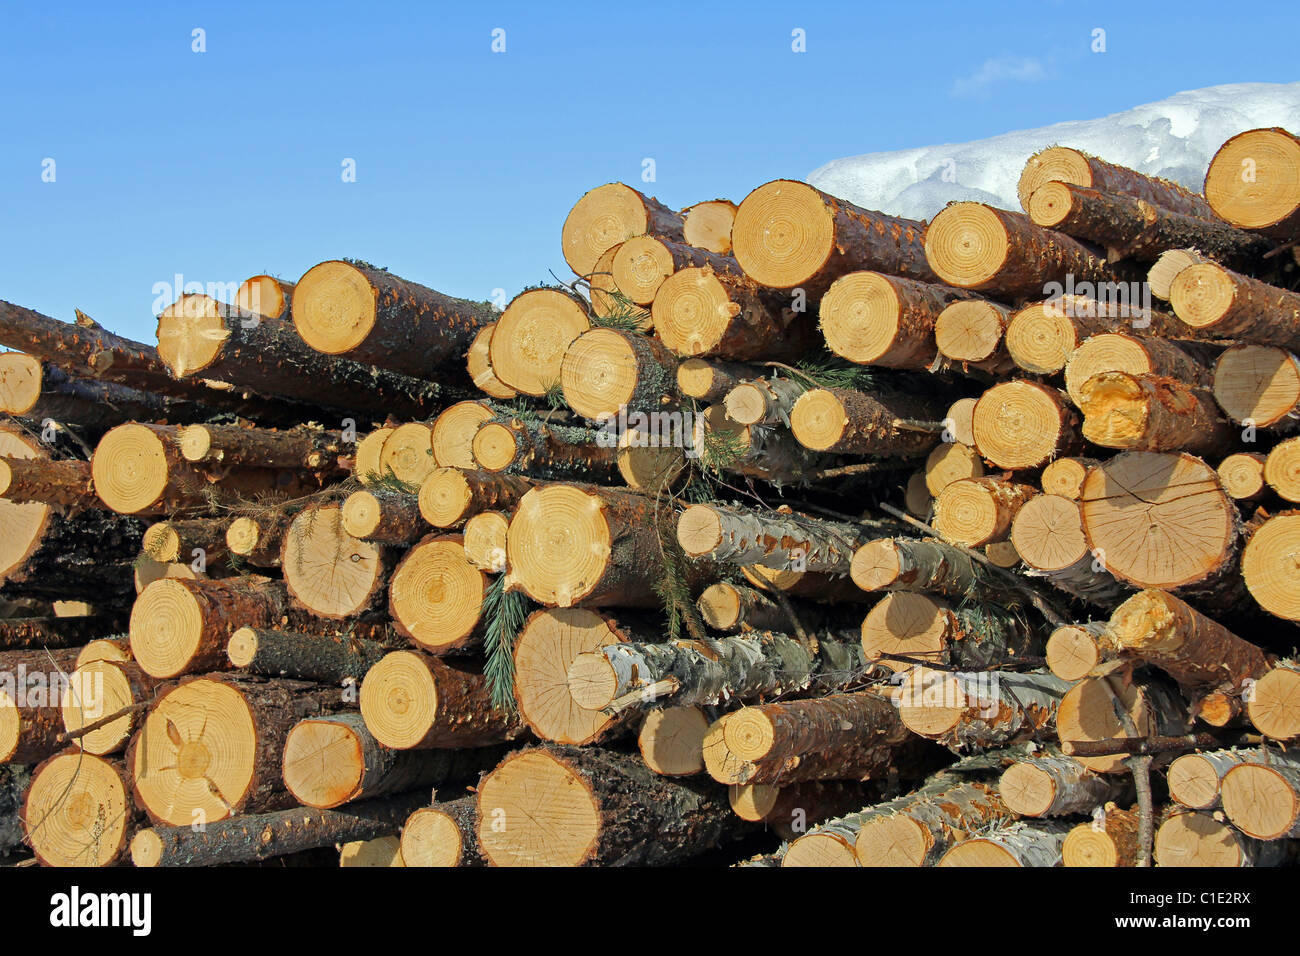 Pile of Wooden Logs against Blue Sky Stock Photo